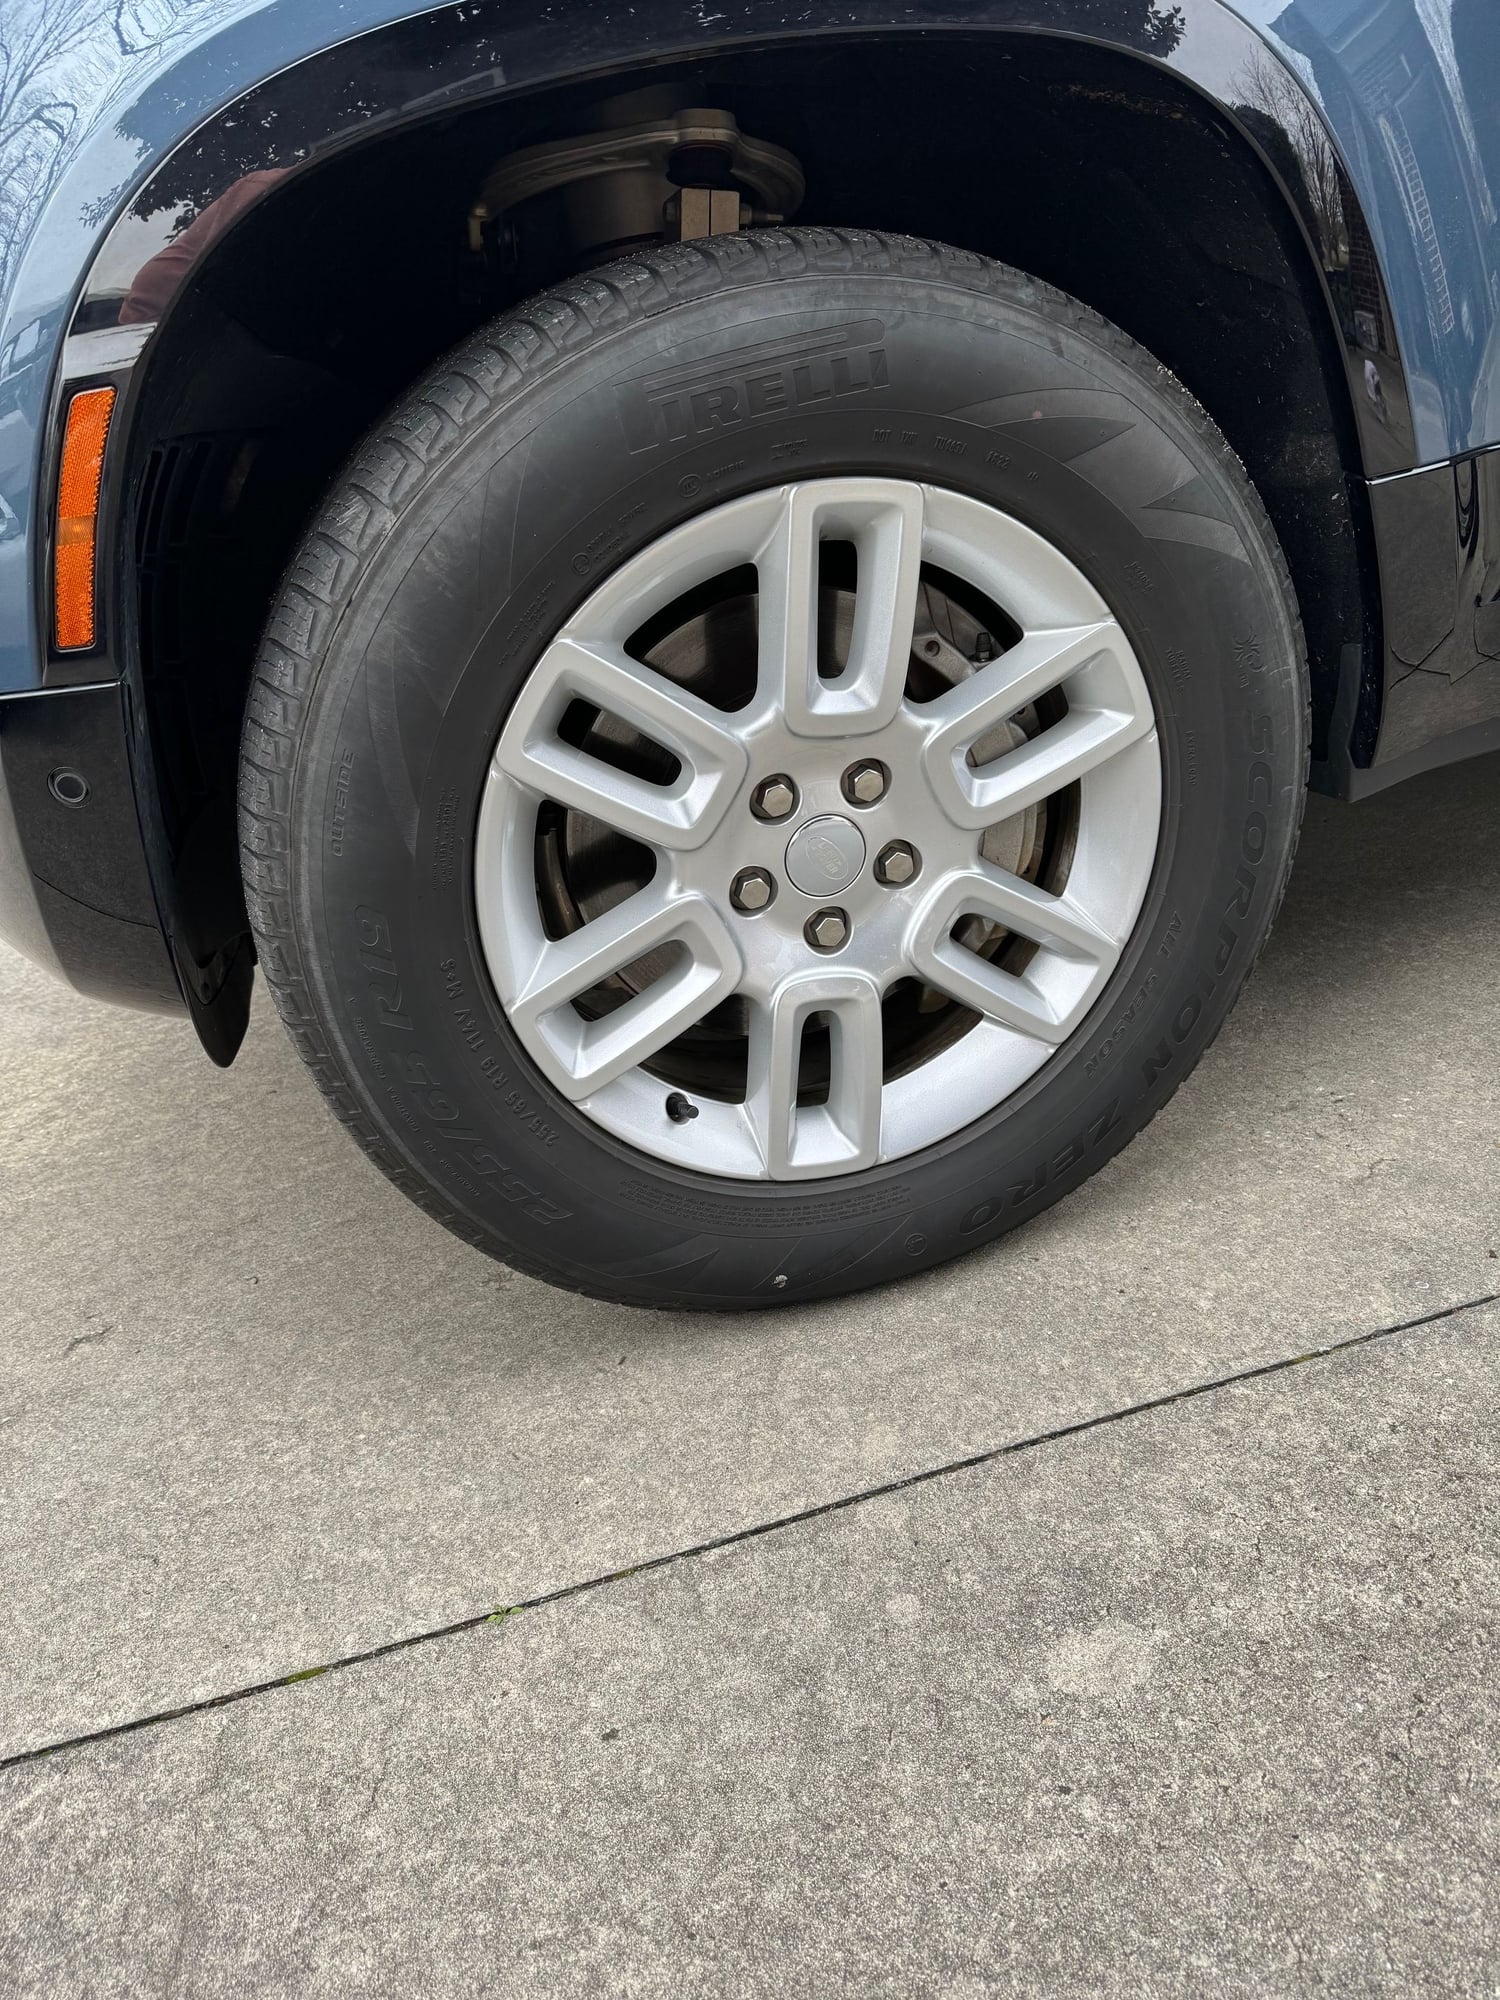 Wheels and Tires/Axles - 2023 Defender 110 19 inch rims for sale - Used - 2020 to 2024 Land Rover Defender 110 - Laurens, SC 29360, United States